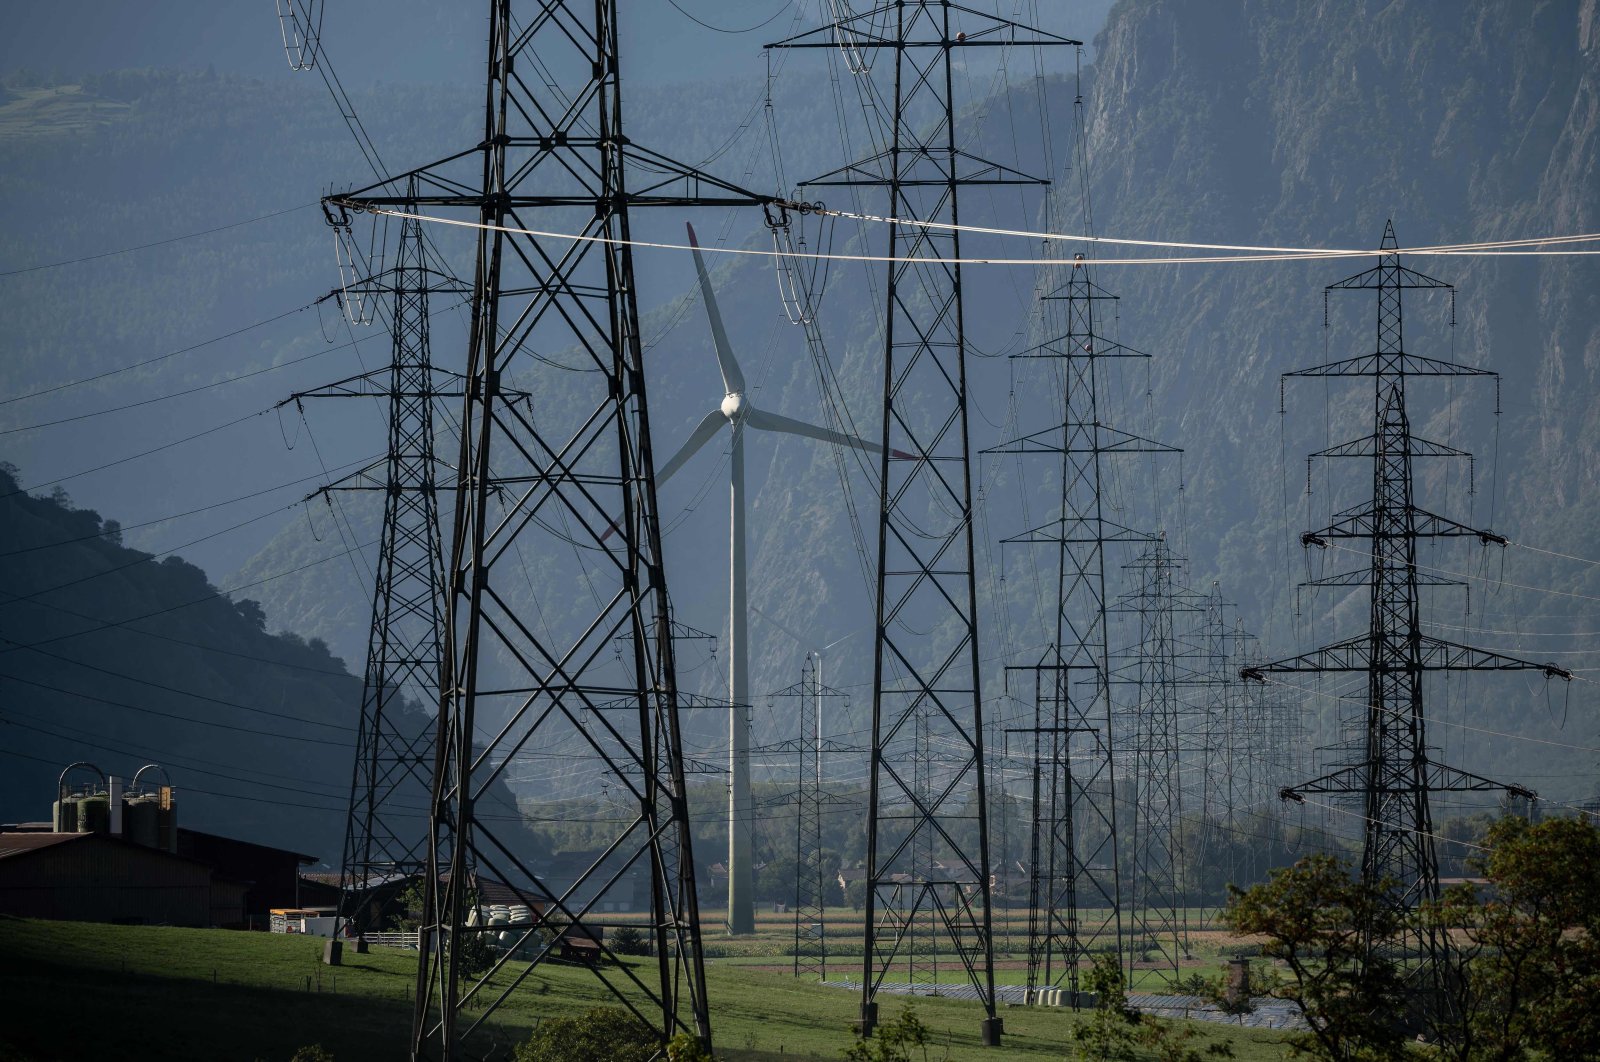 A wind turbine is surrounded by electricity pylons near Evionnaz, western Switzerland, Aug. 23, 2022. (AFP Photo)